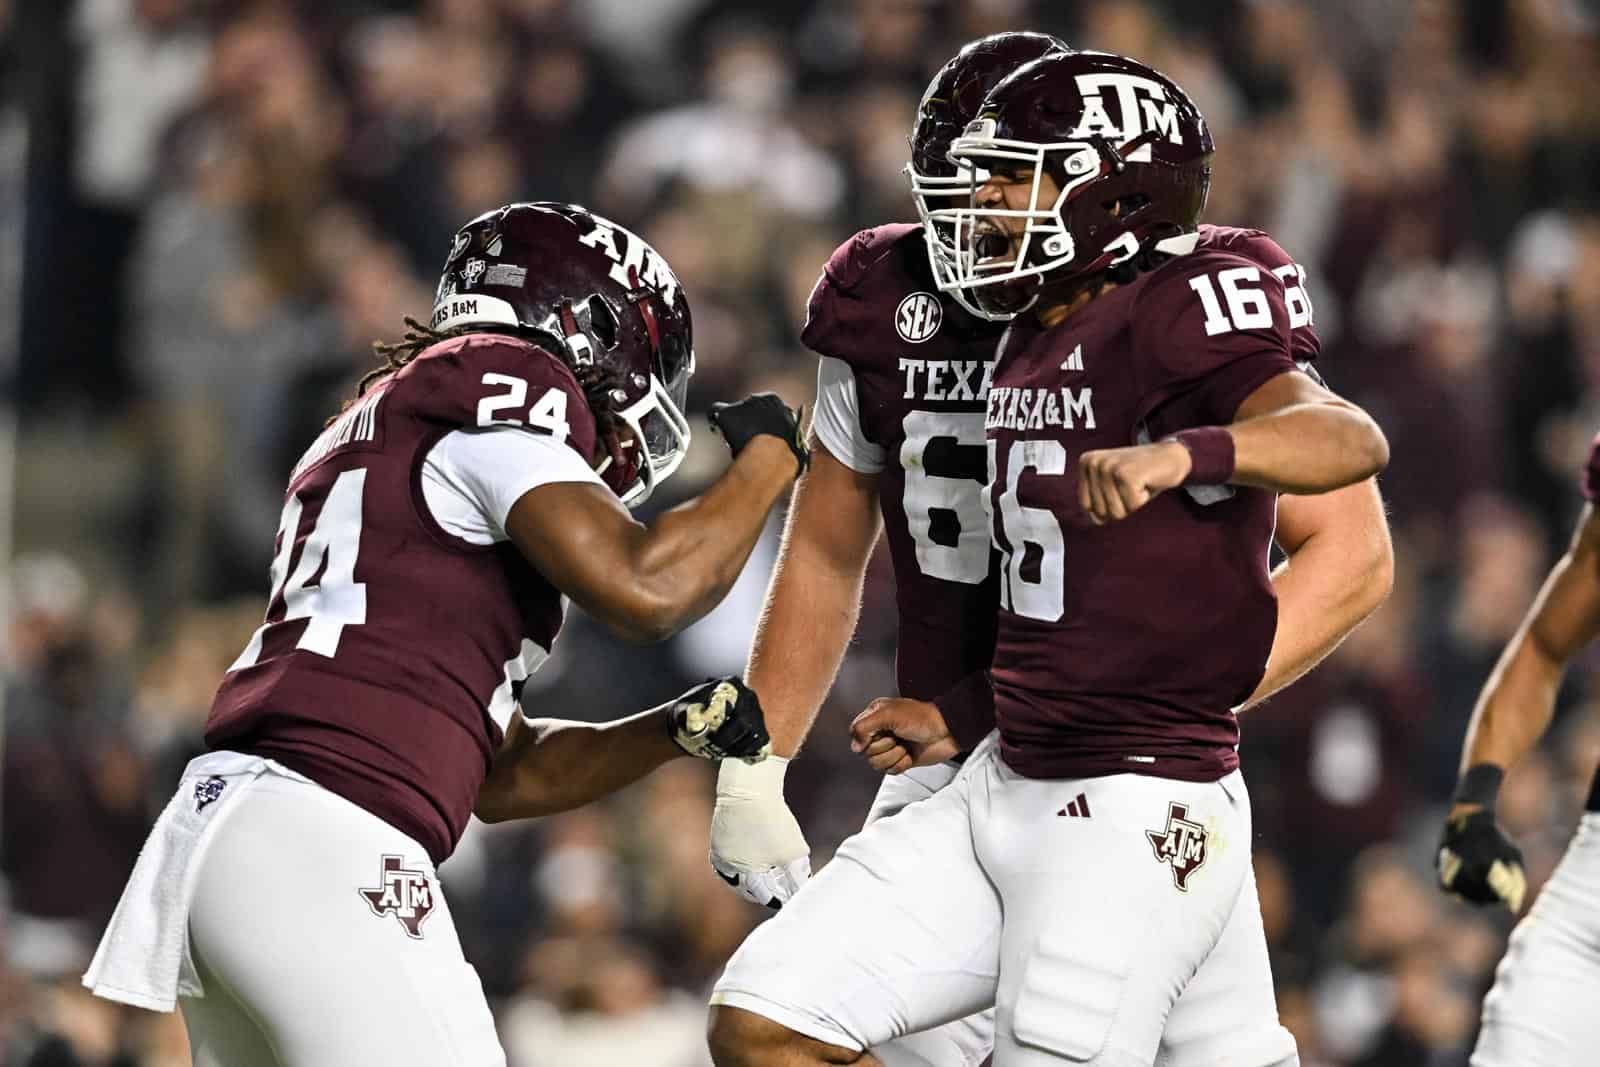 How to watch the Texas A&M-Abilene Christian football game: Kickoff time, TV, streaming info